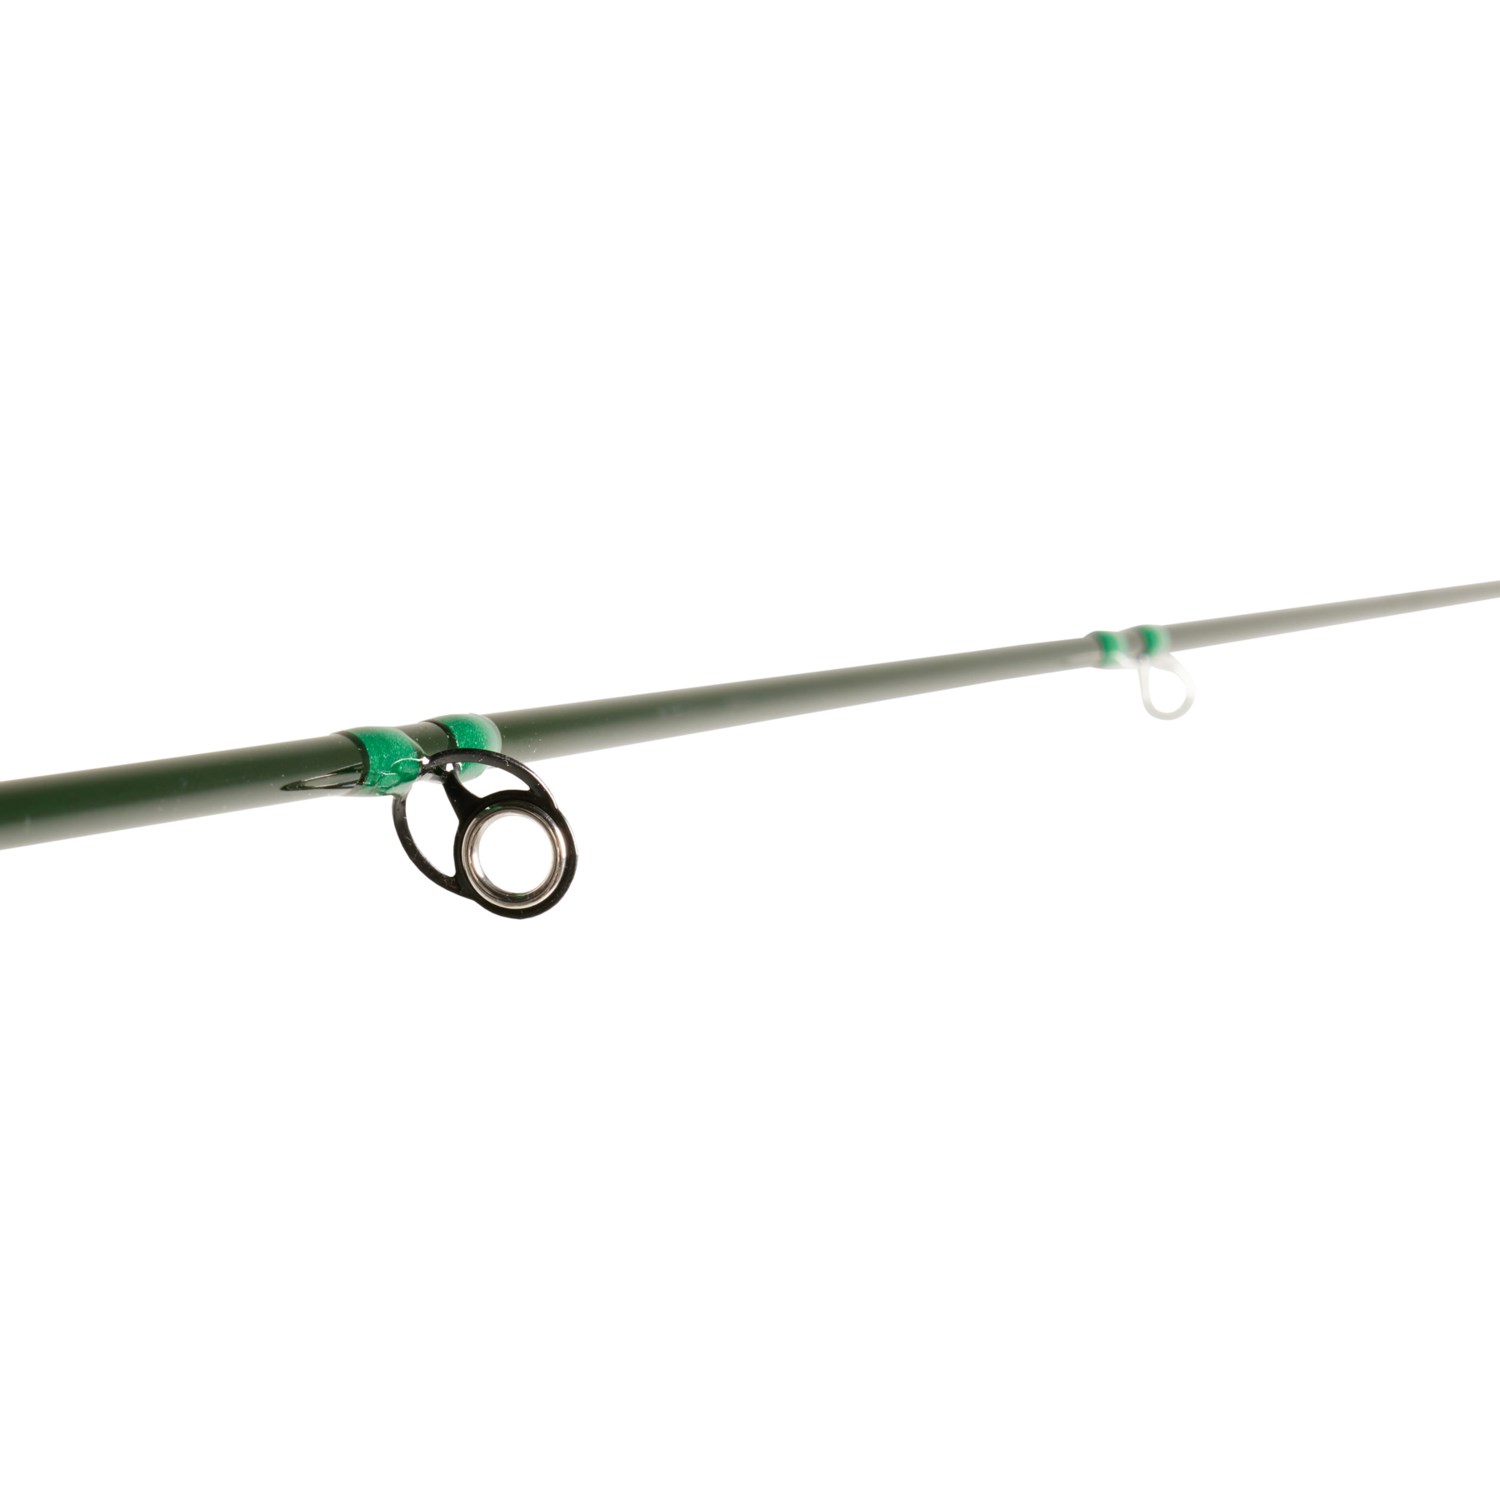 https://i.stpost.com/temple-fork-outfitters-signature-2-freshwater-fly-rod-4wt-86-2-piece~a~3vuhr_2~1500.1.jpg